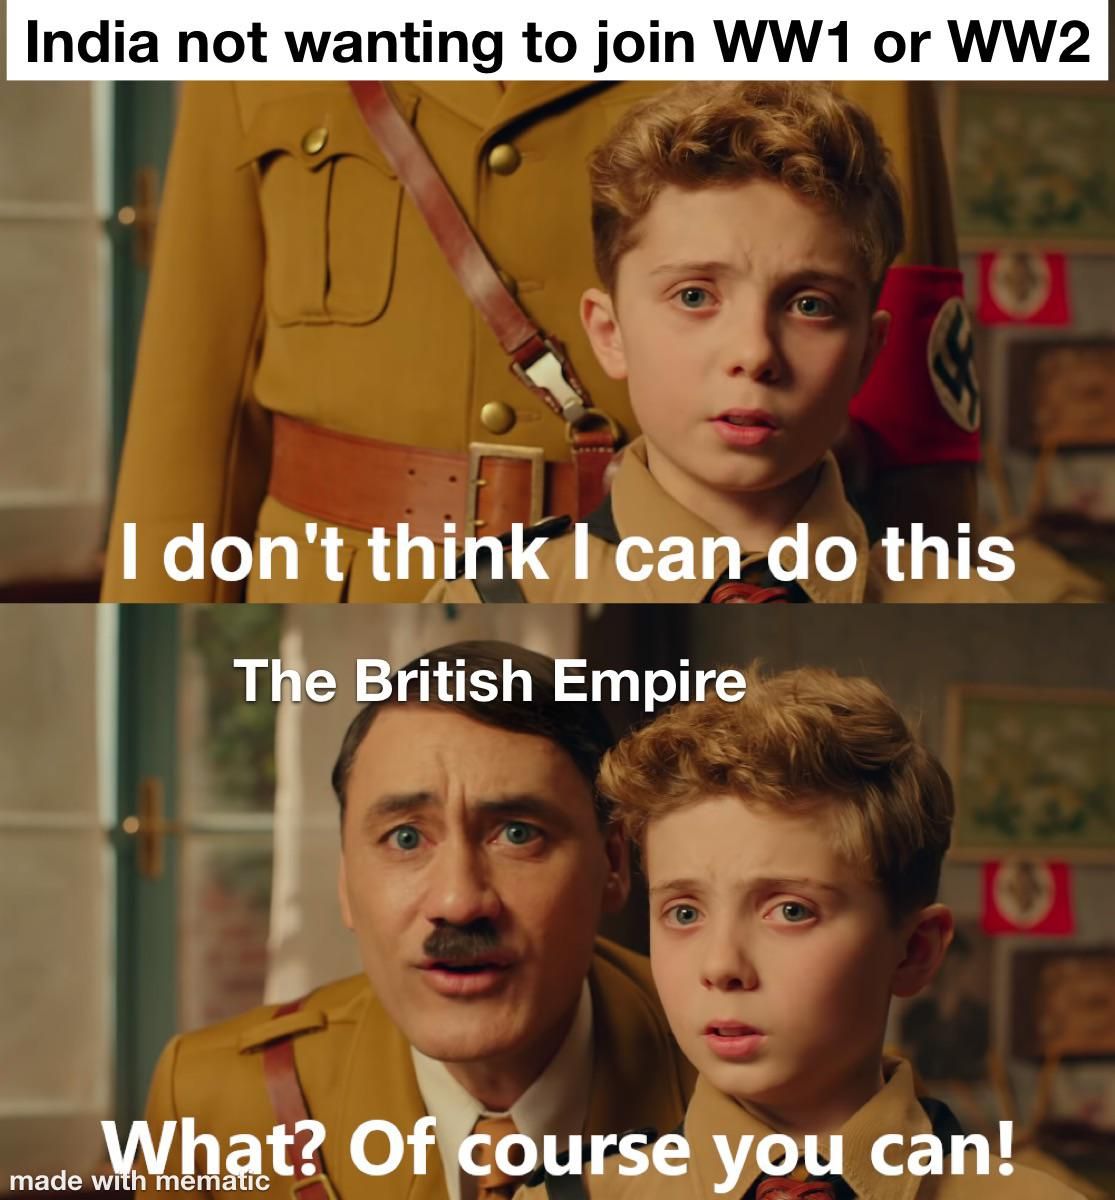 India having to join to WW1 and WW2 because of Britain